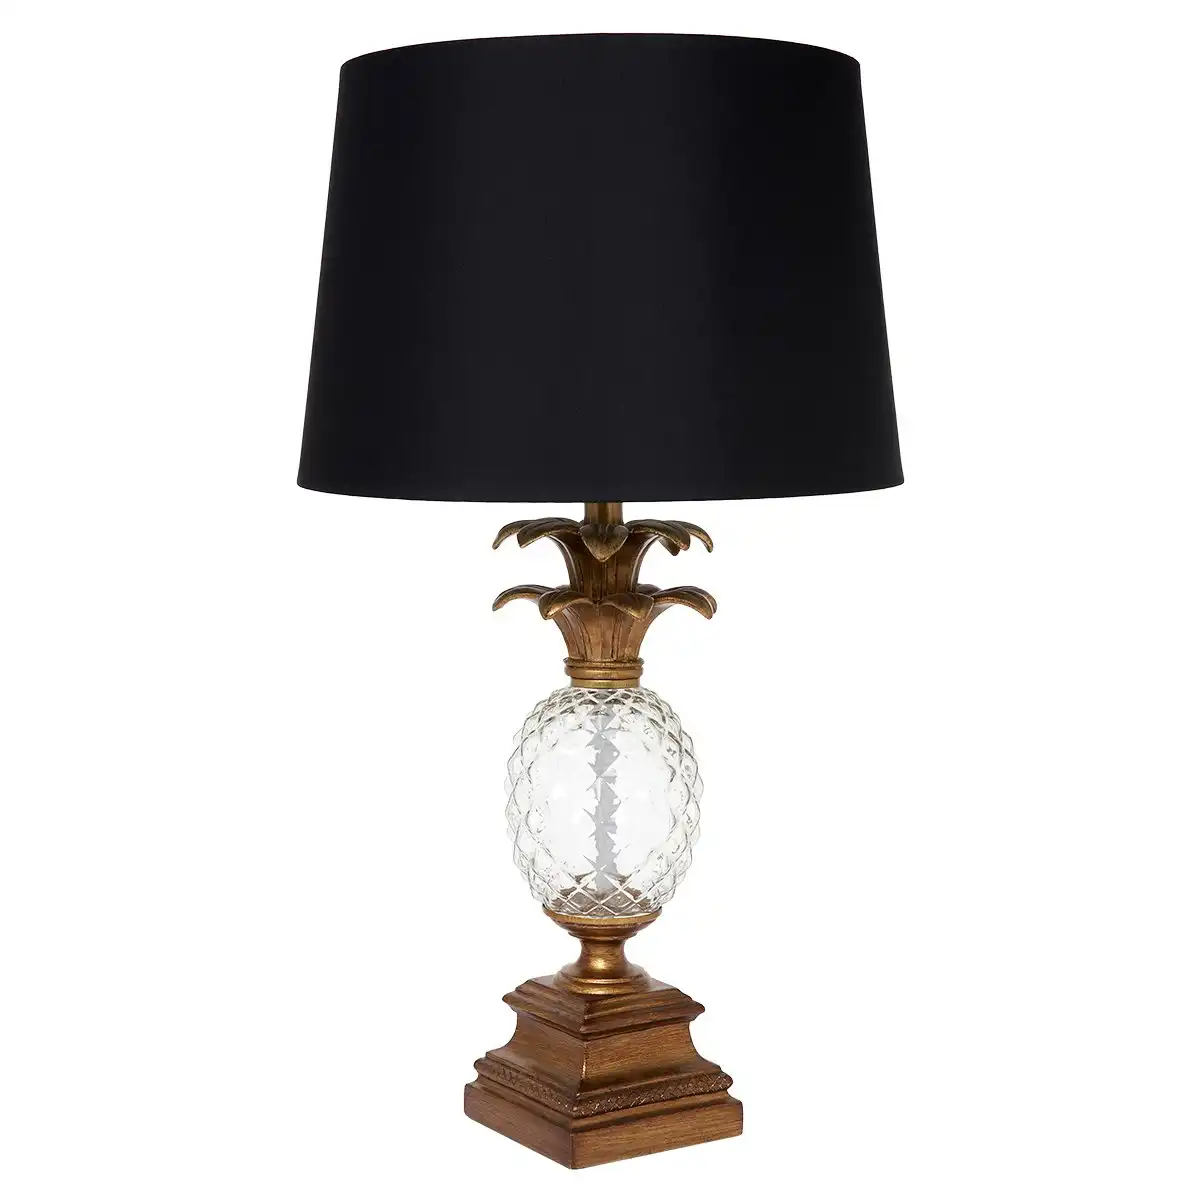 Cafe Lighting Langley Table Lamp - Antique Gold